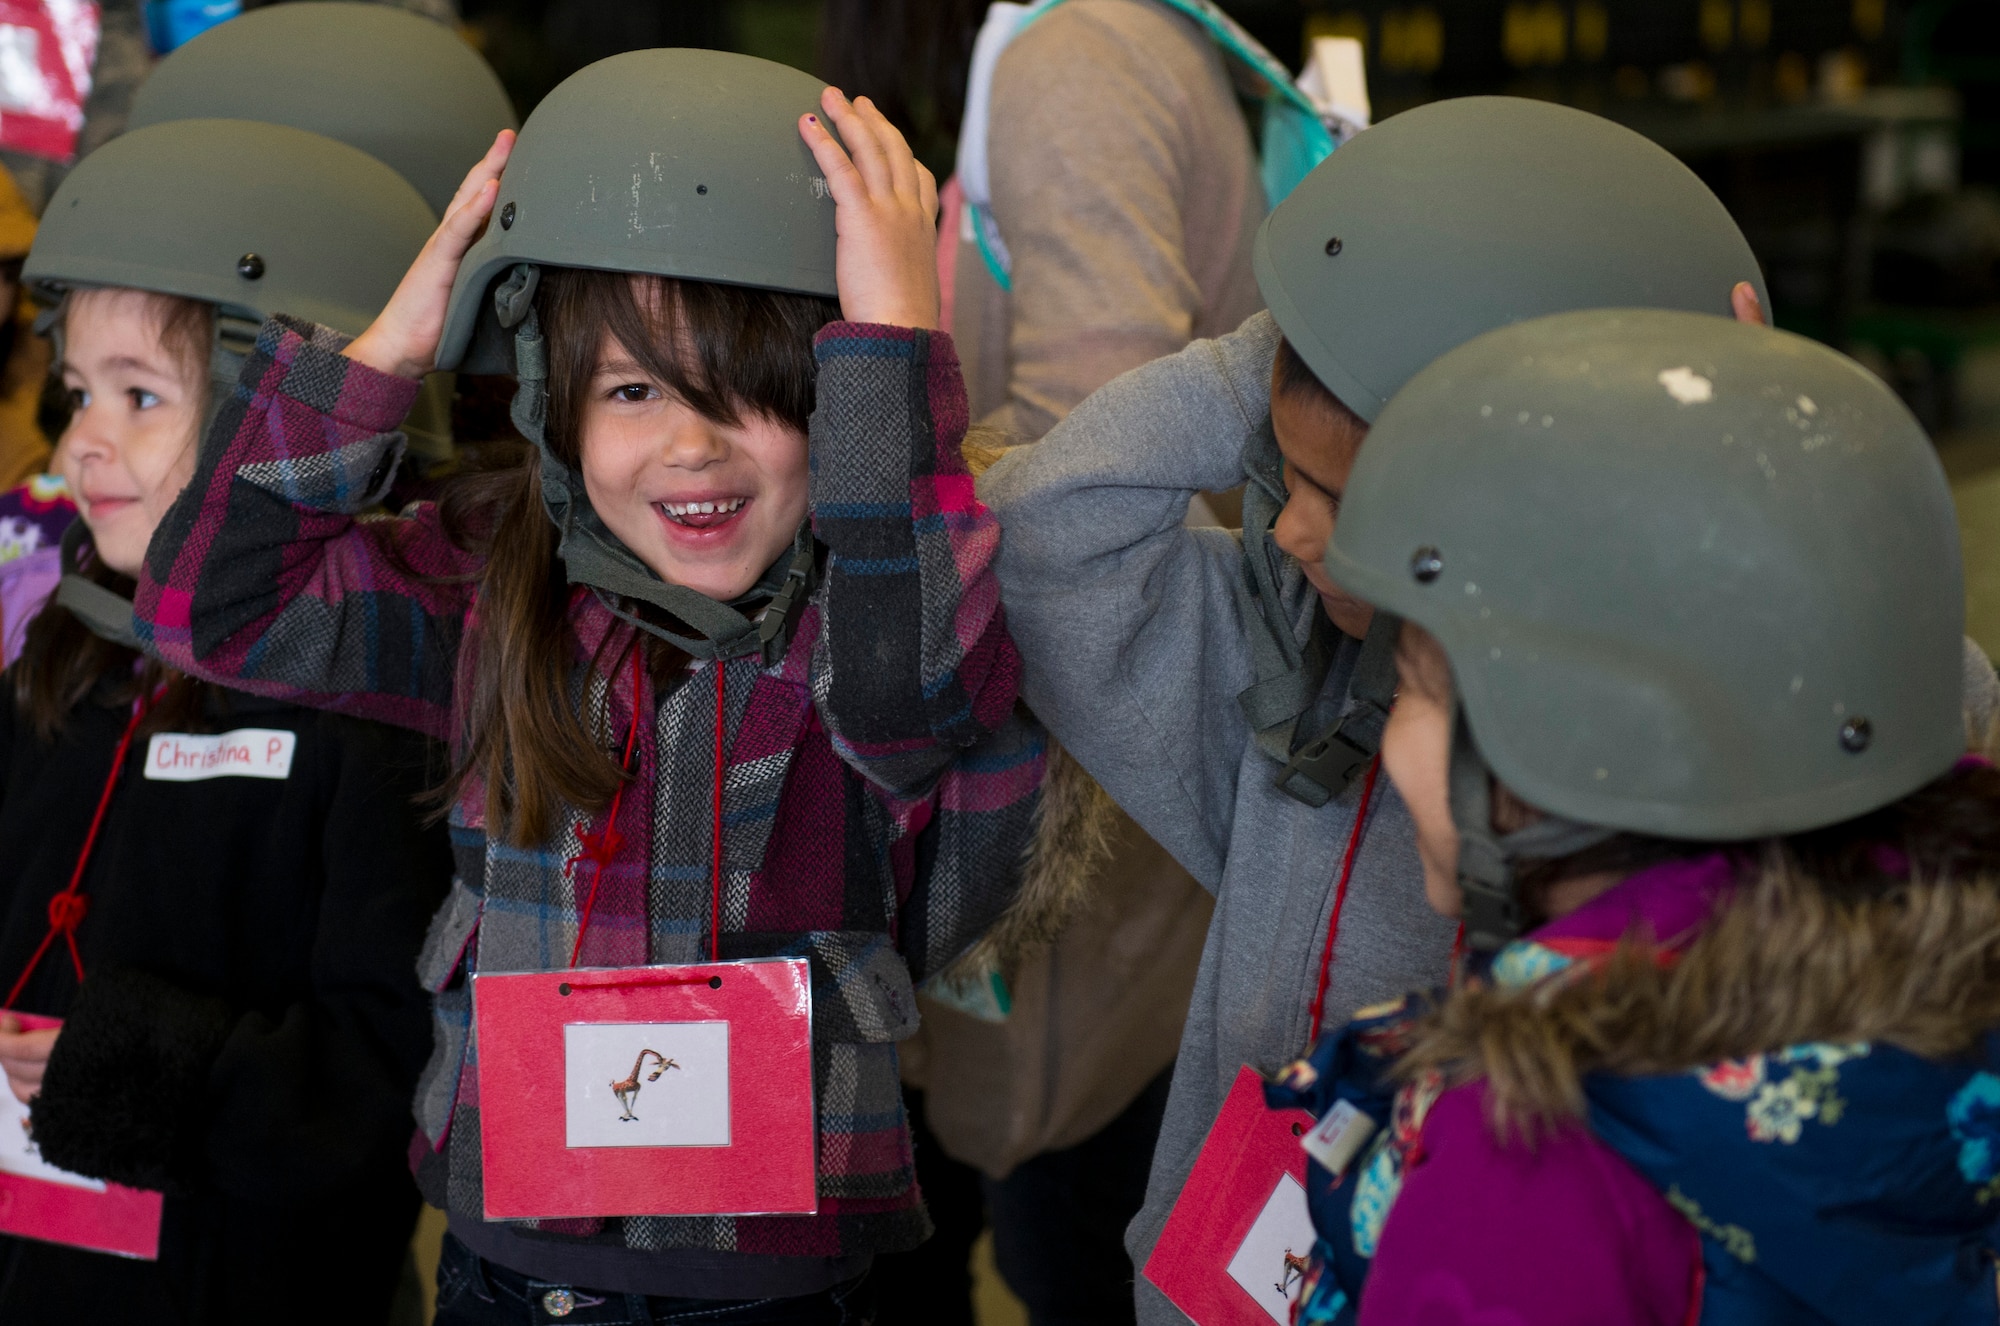 Students from Spangdahlem Elementary School try on helmets during Kids’ Deployment Day at Spangdahlem Air Base, Germany, April 29, 2015. The students also tried on body armor during their simulated deployment to Rio De Janeiro. (U.S. Air Force photo by Airman 1st Class Luke Kitterman/Released)